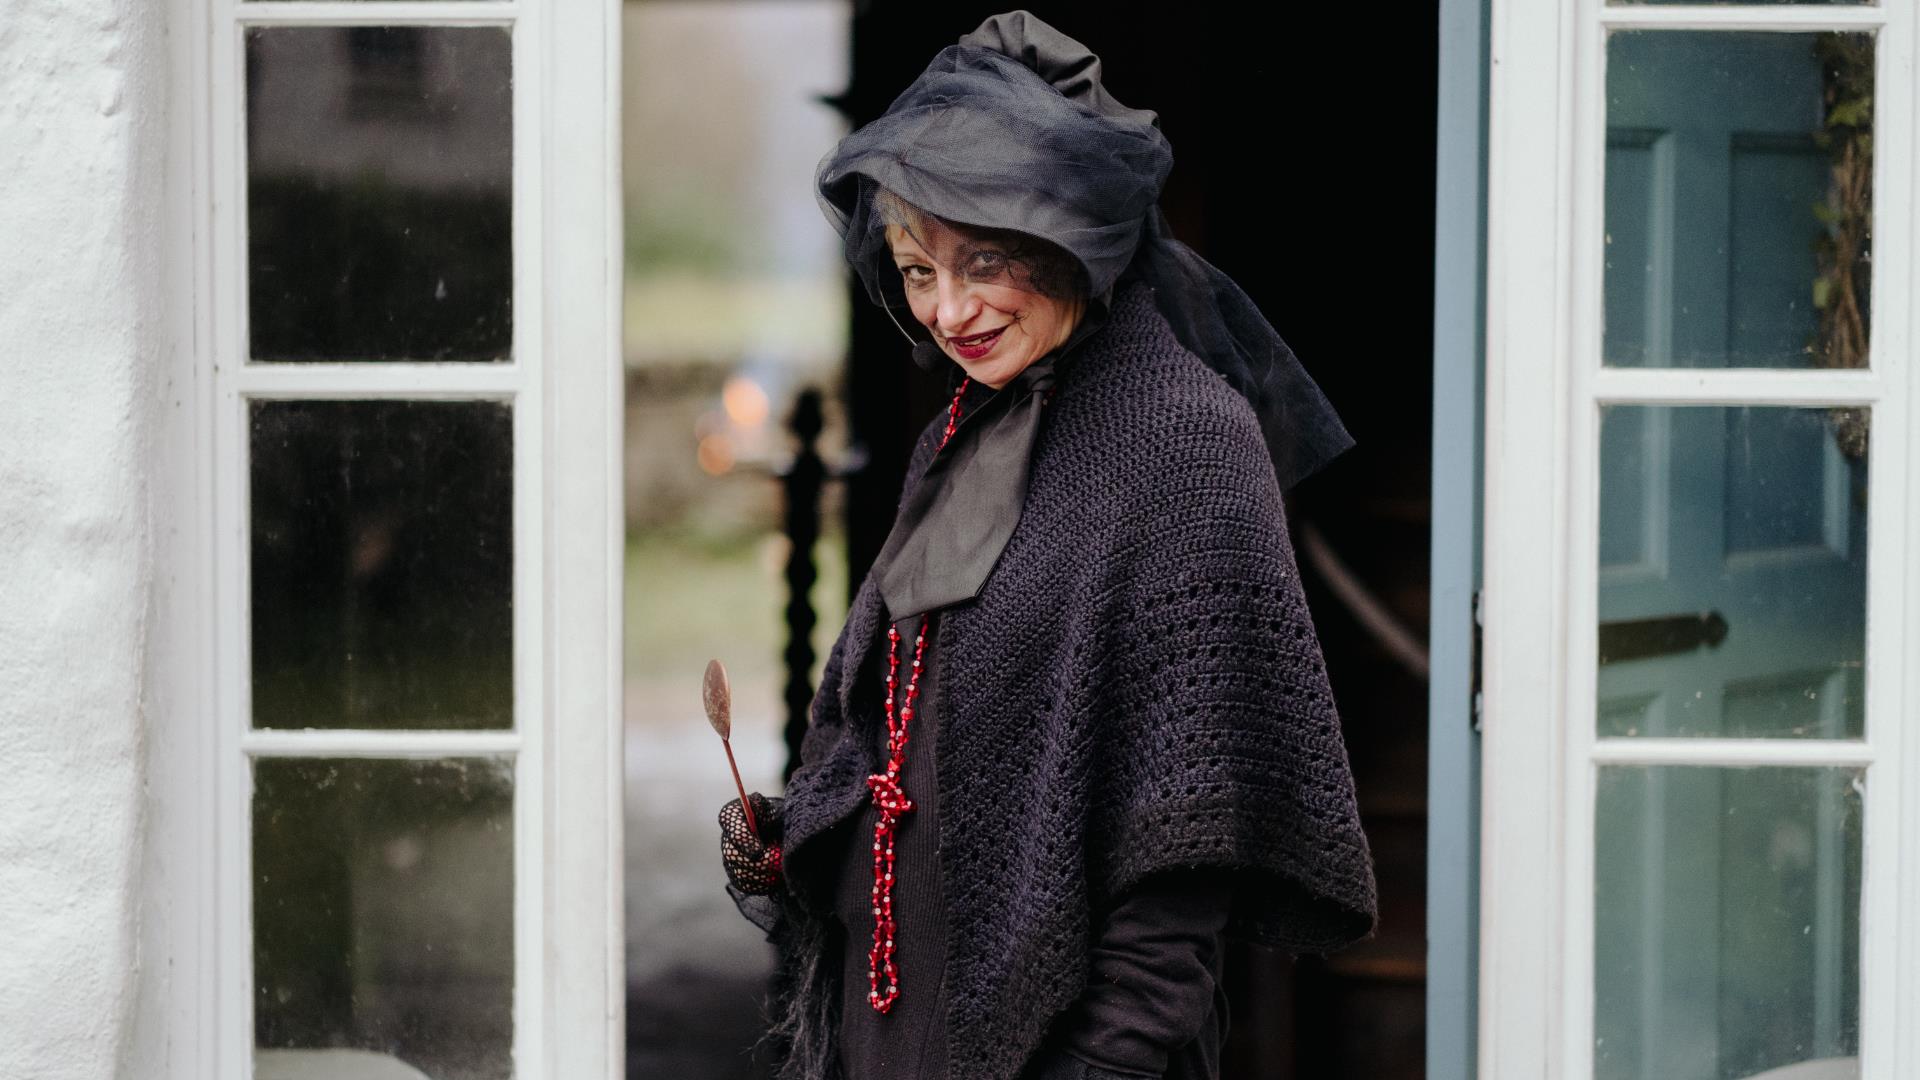 A lady dressed up for Halloween at ulster American folk park